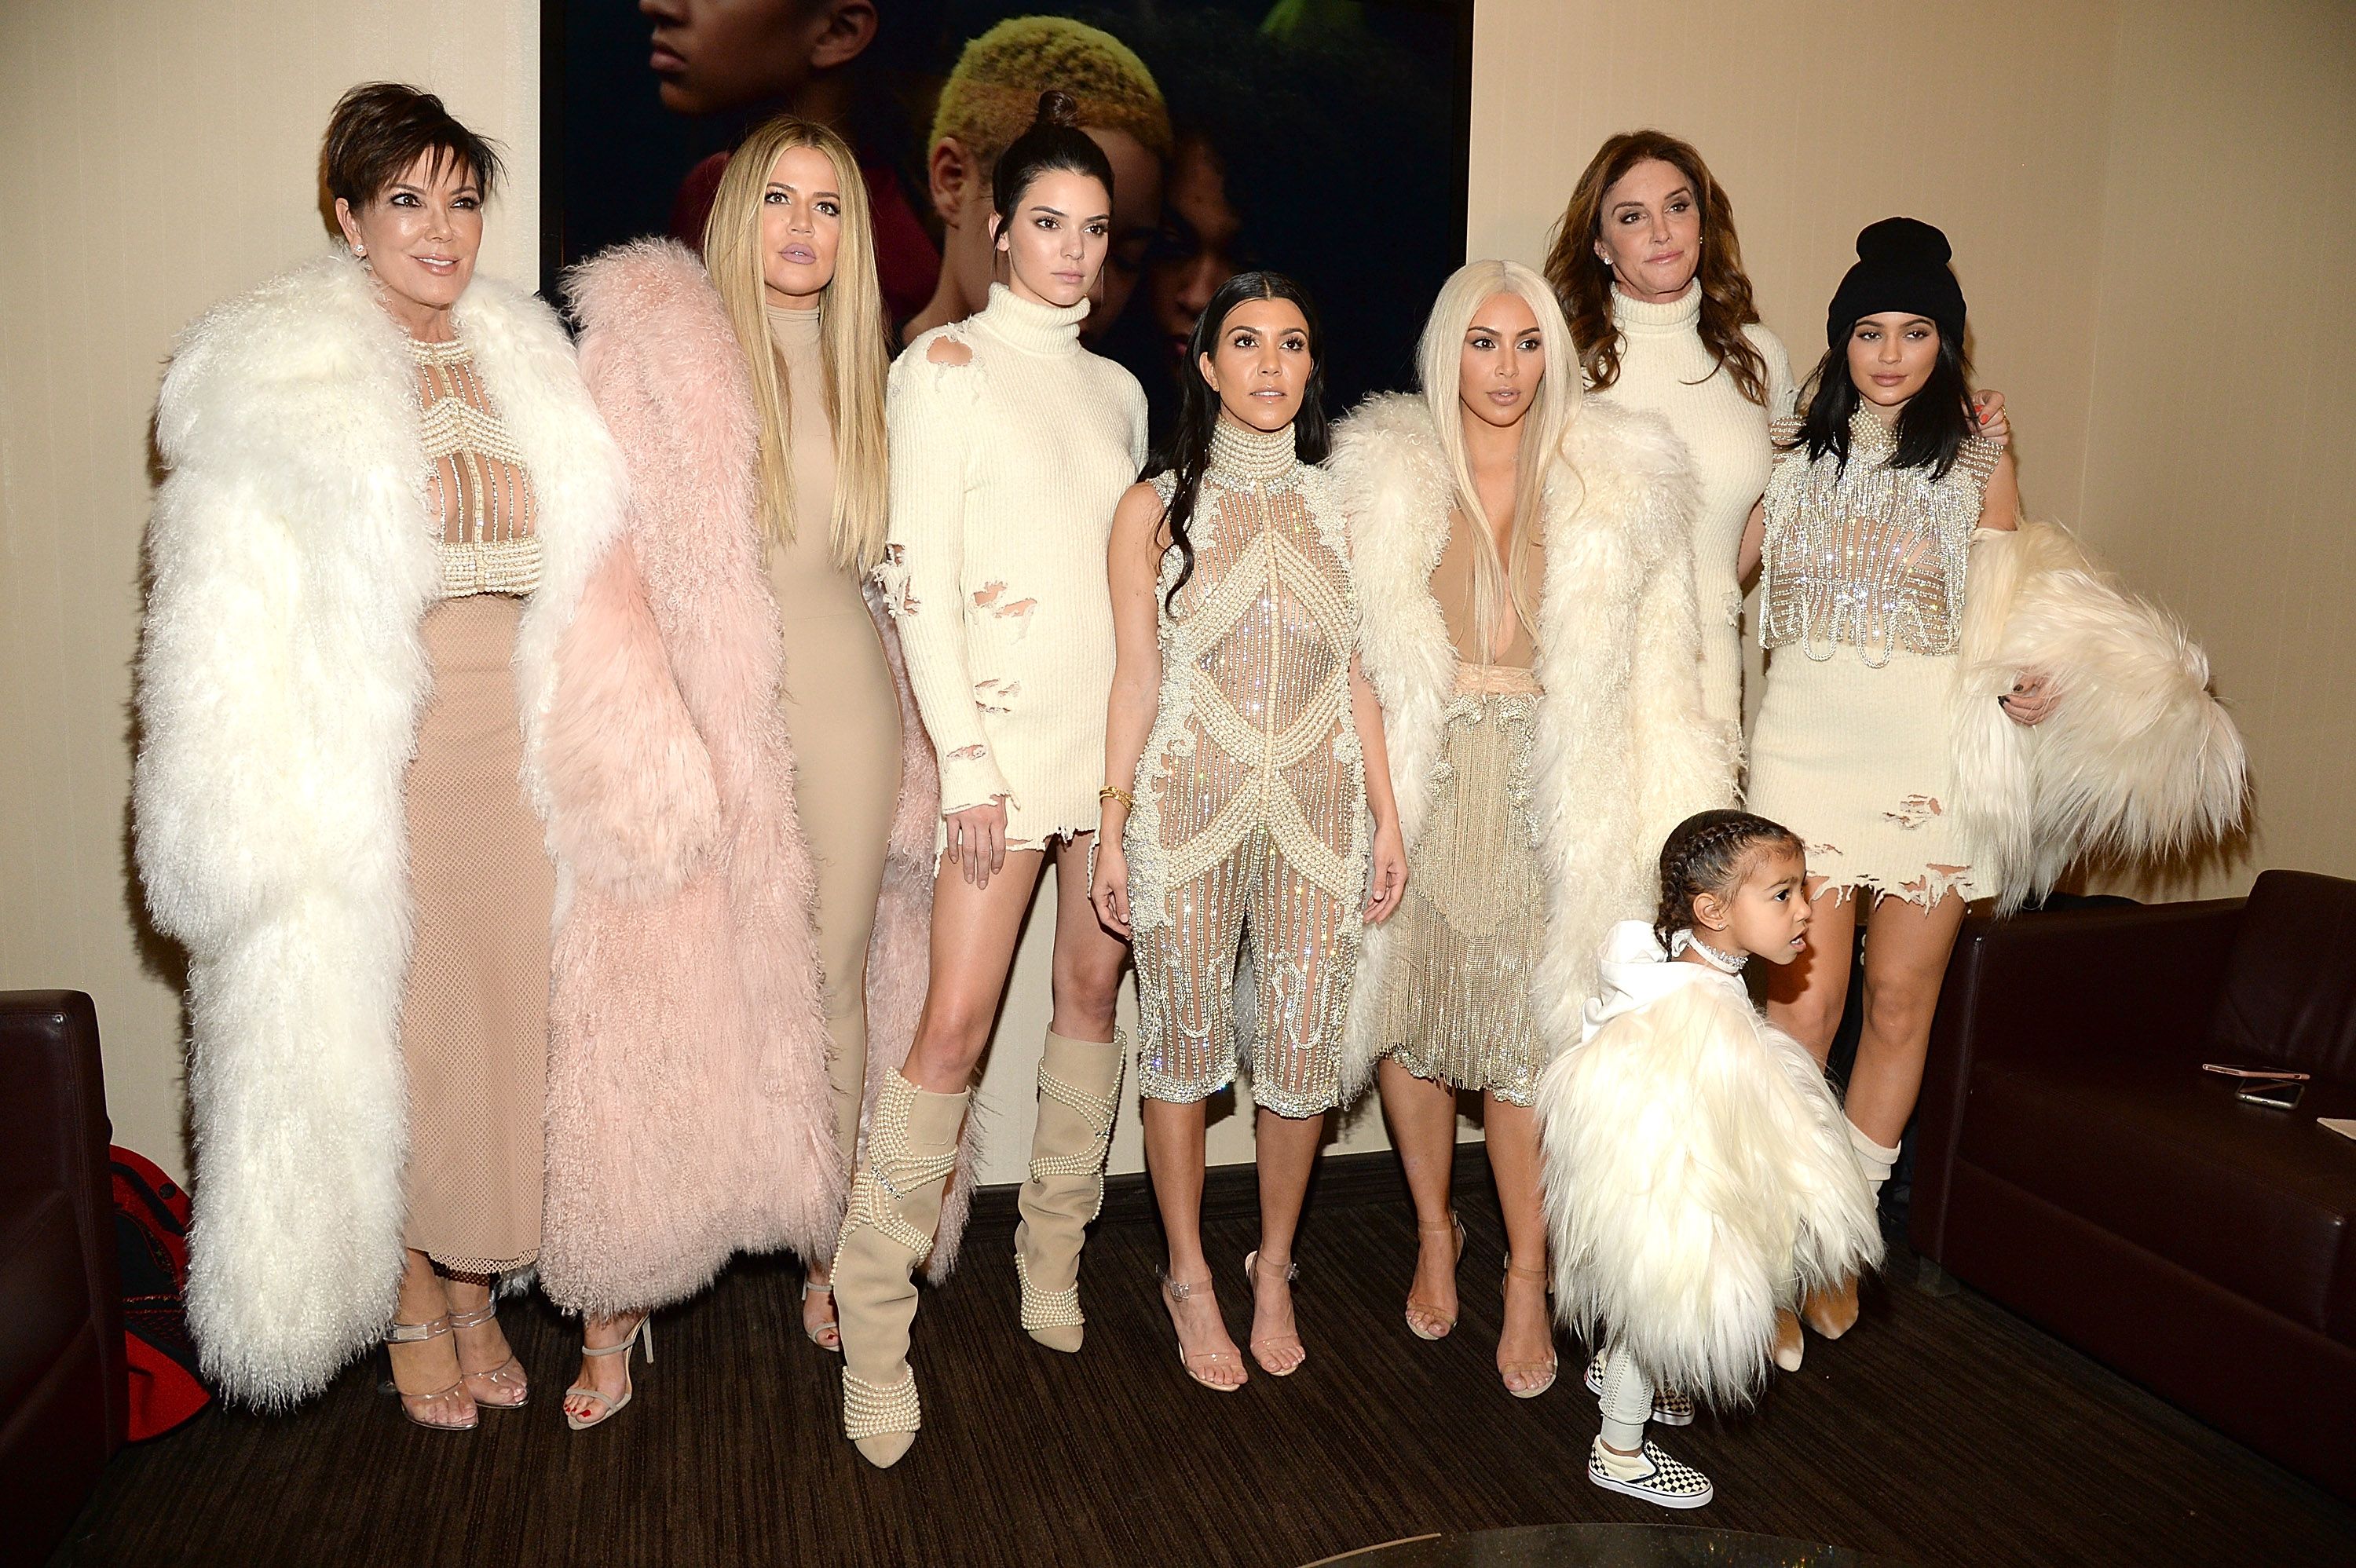 The Kardashian-Jenner sisters alongside Kris and Caitlyn Jenner at Kanye West Yeezy Season 3 at Madison Square Garden on February 11, 2016. | Photo: Getty Images